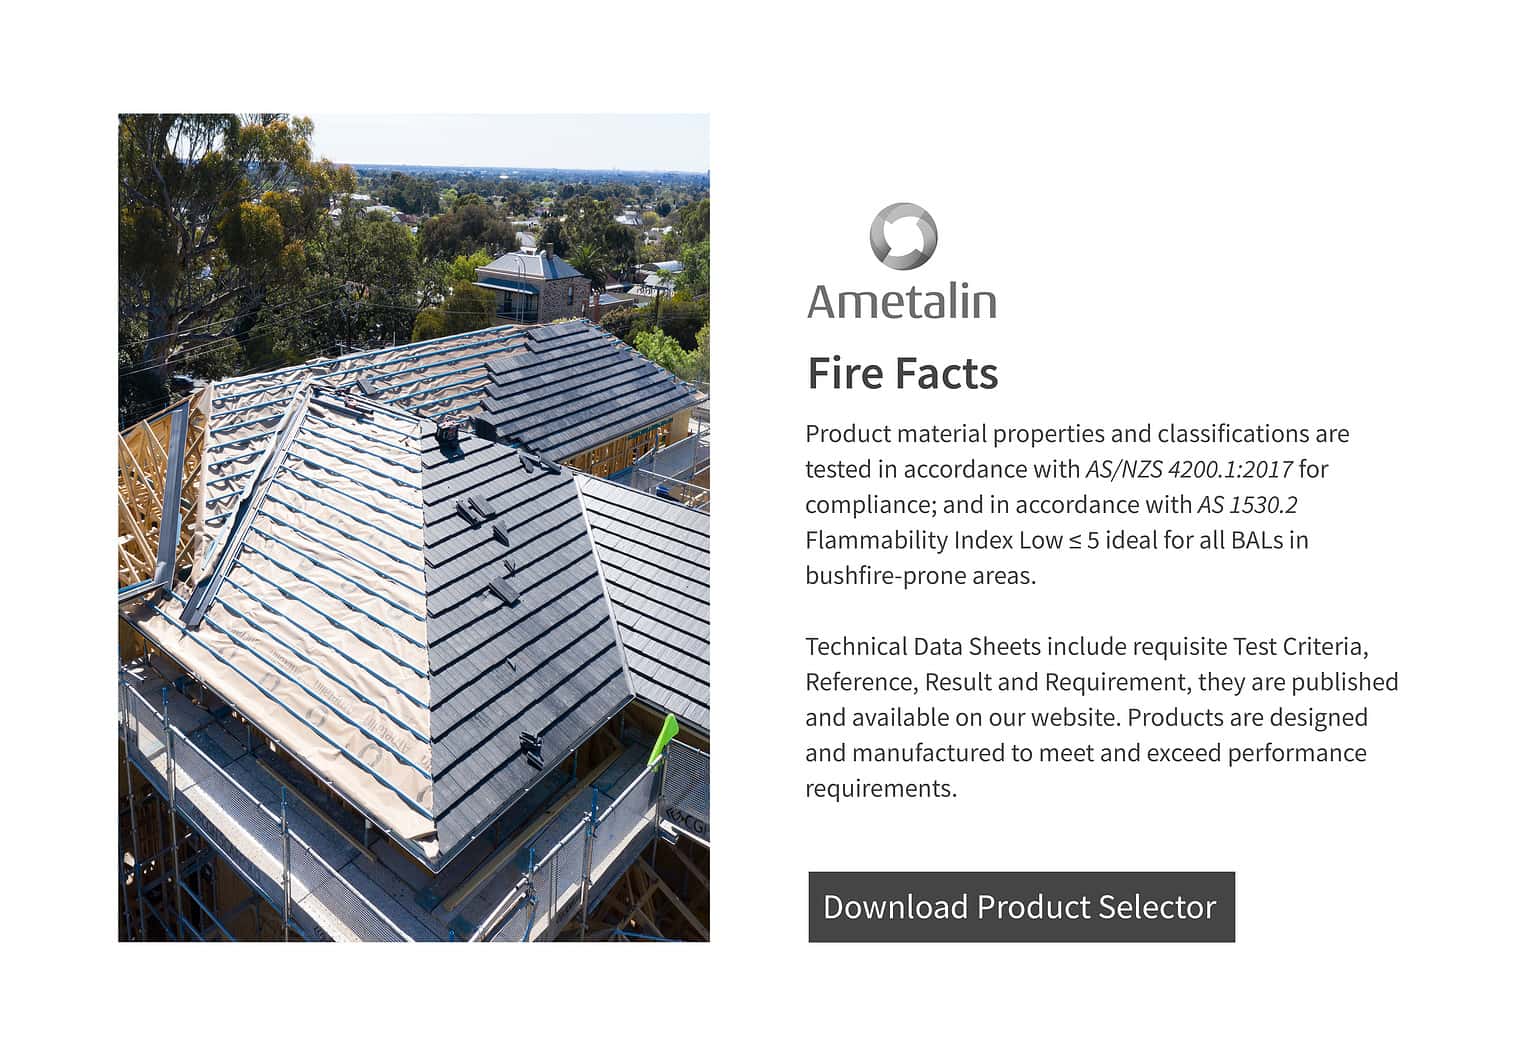 Fire Facts